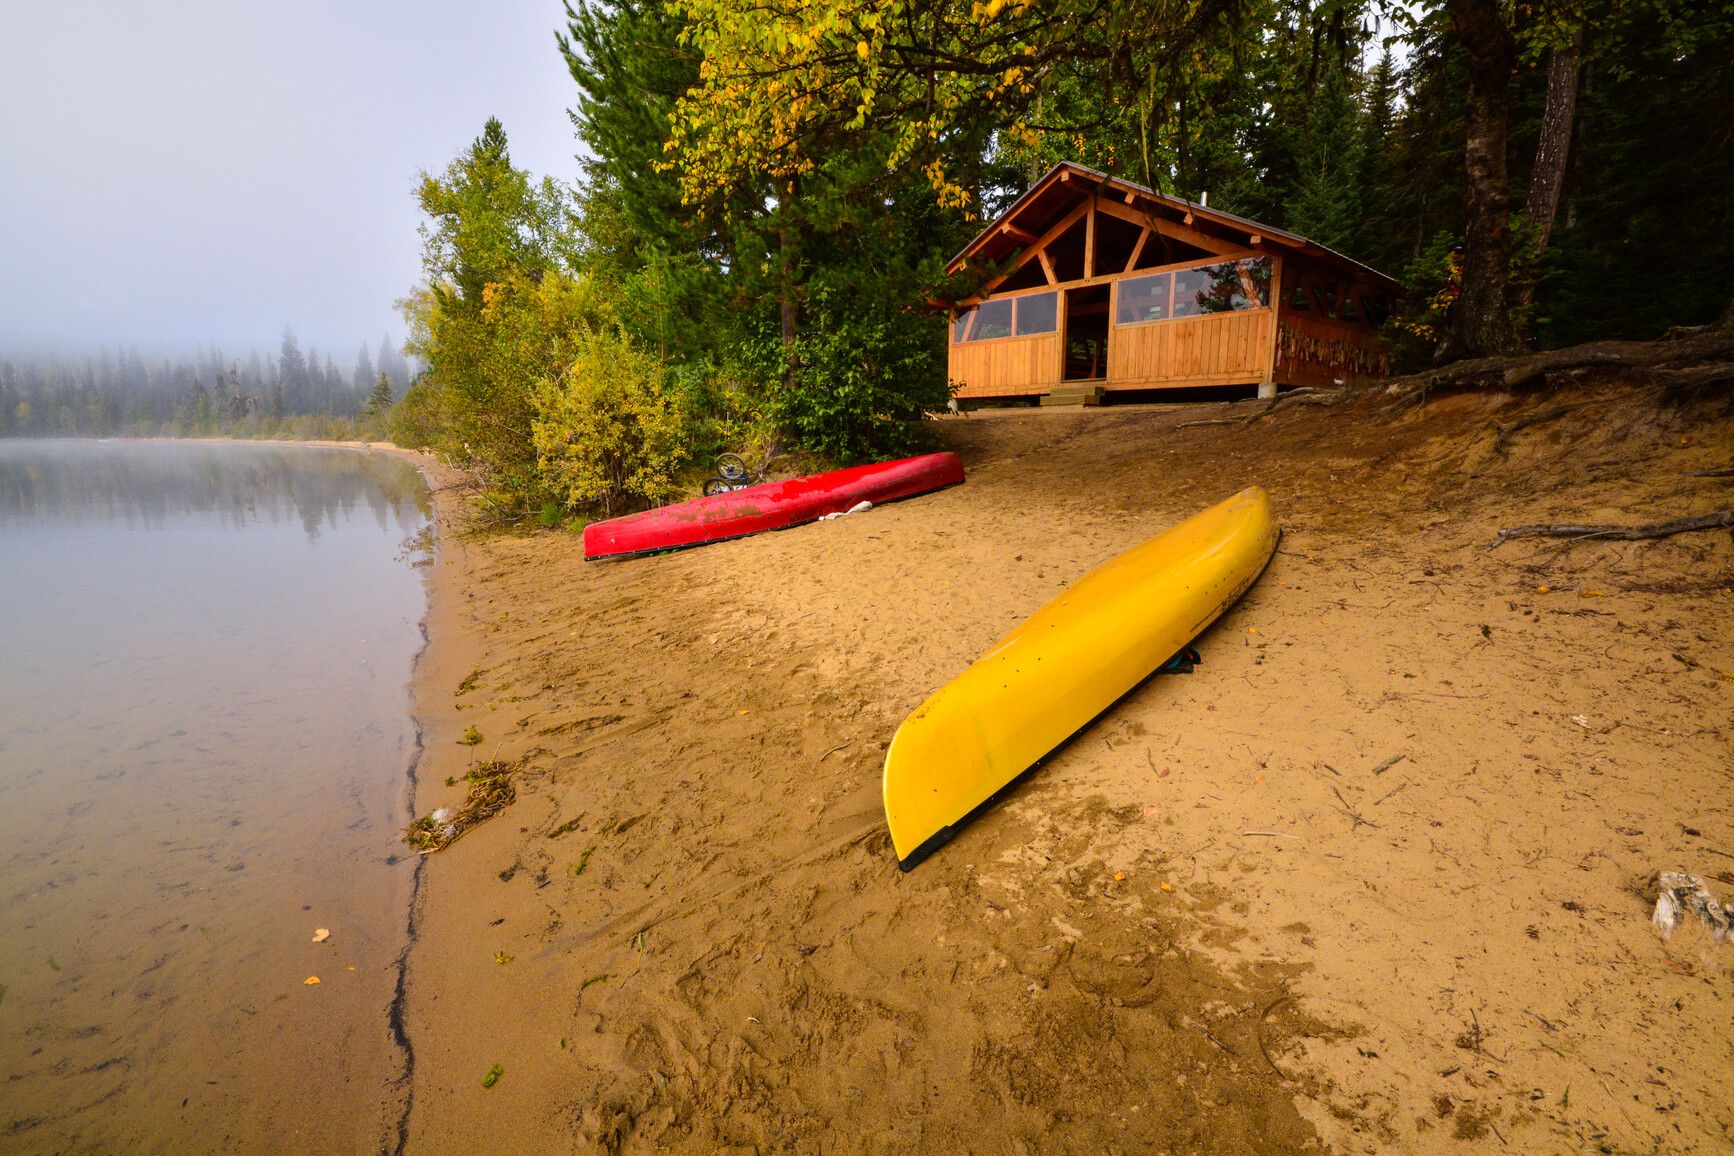 Canoes rest on a beach in front of a cabin on the Spectacle Lakes, part of the Bowron Lakes circuit.